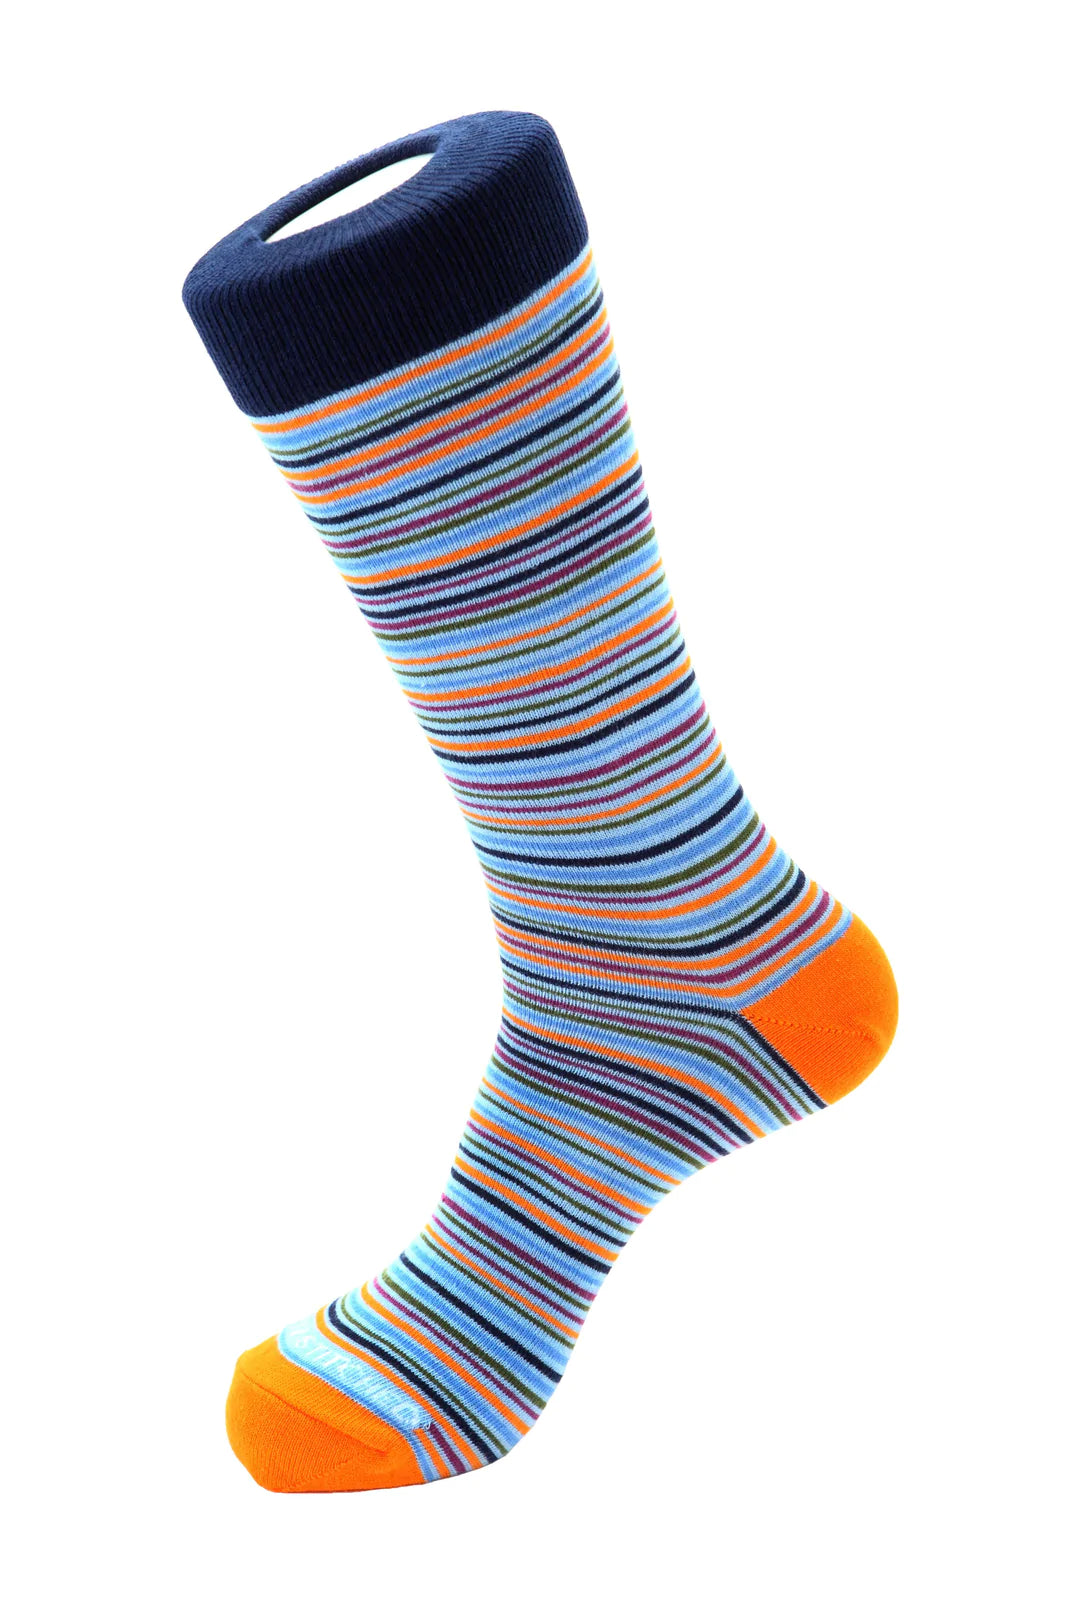 Unsimply Stitched socks with blue, orange, and purple stripes, making it a great pairing with DFR89 blue denim jeans and a fun Sugar sport shirt.